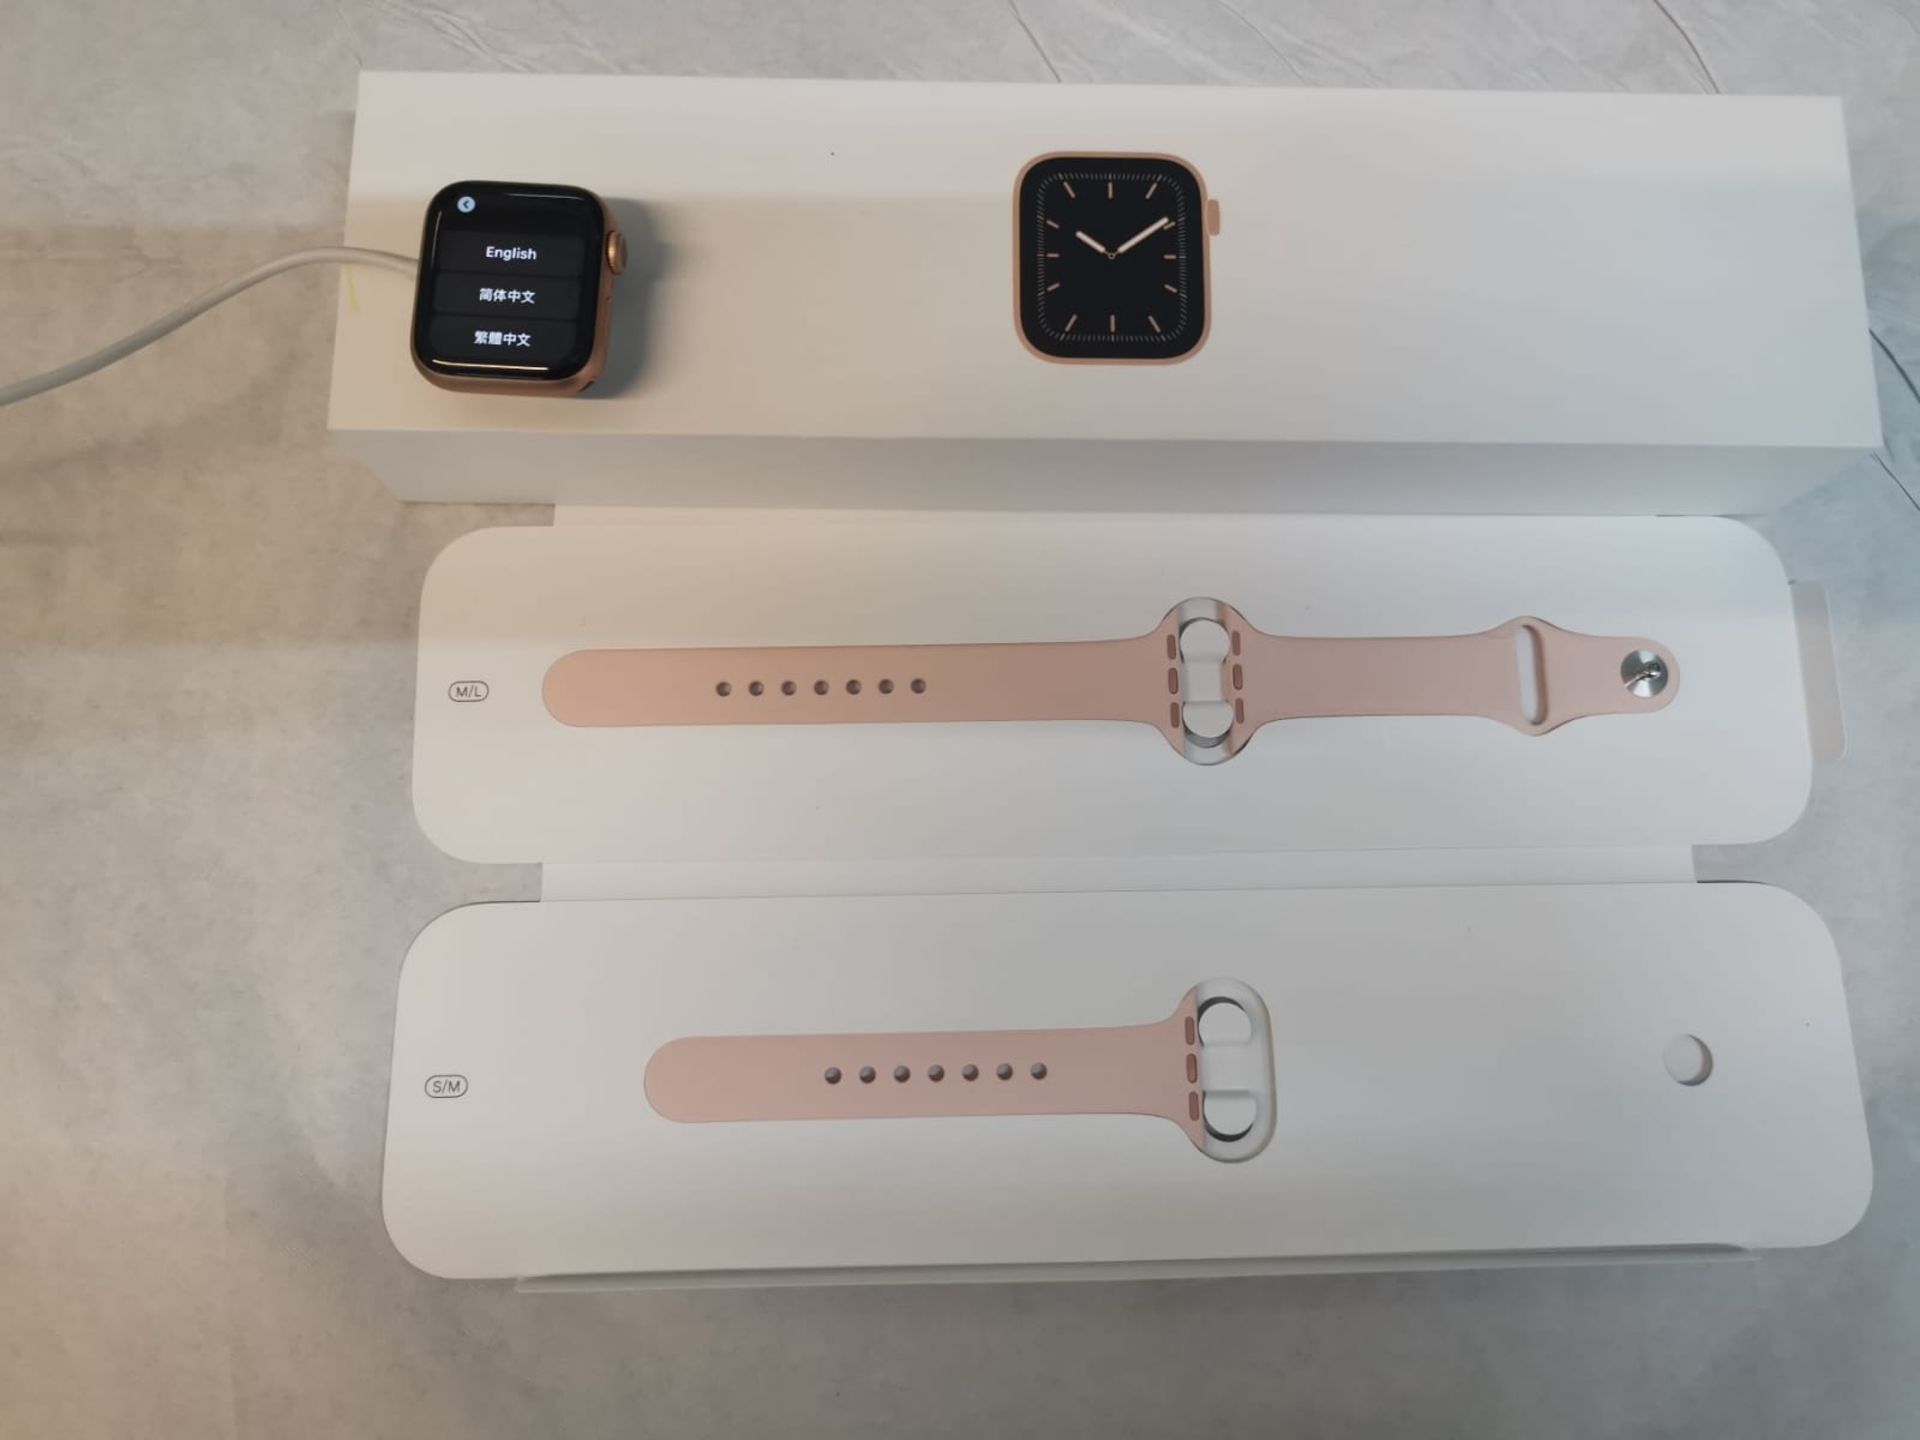 1 BOXED APPLE WATCH SERIES 5 GPS MODEL MWV72B/A (A2092) 40MM GOLD ALUMINUM CASE PINK SAND SPORT BAND